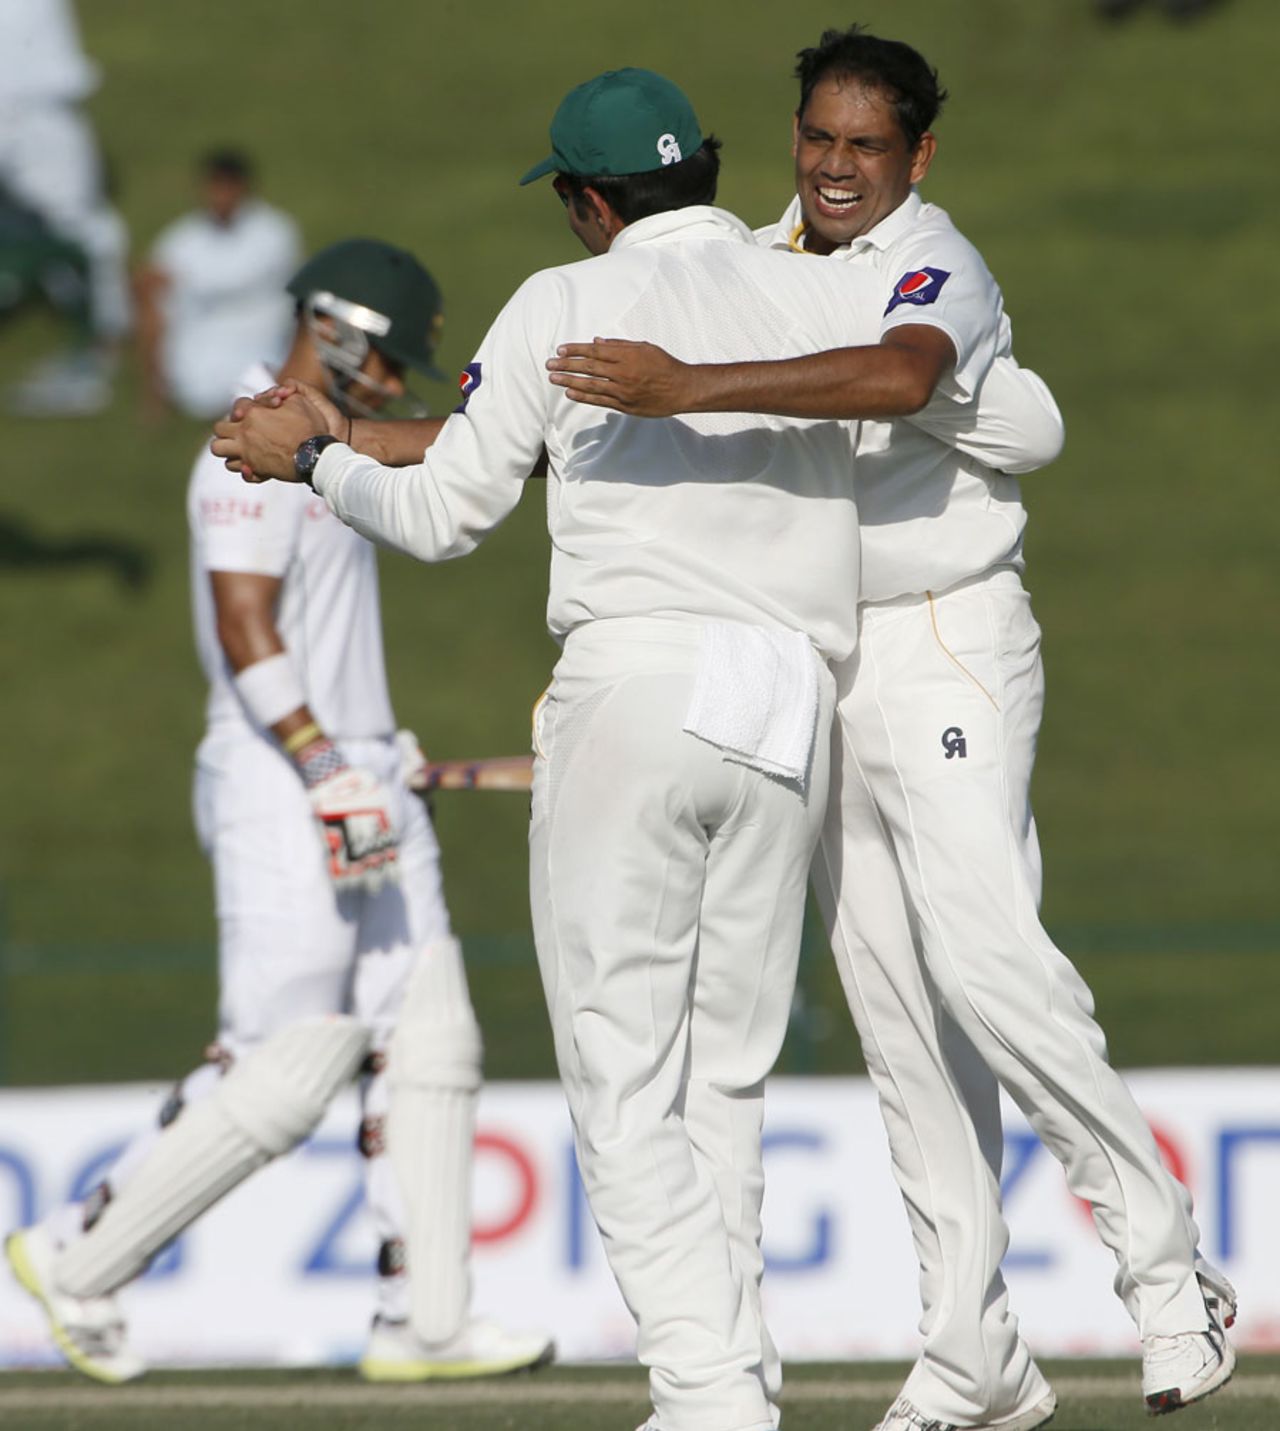 Zulfiqar Babar is over the moon after snaring JP Duminy, Pakistan v South Africa, 1st Test, Abu Dhabi, 1st day, October 14, 2013